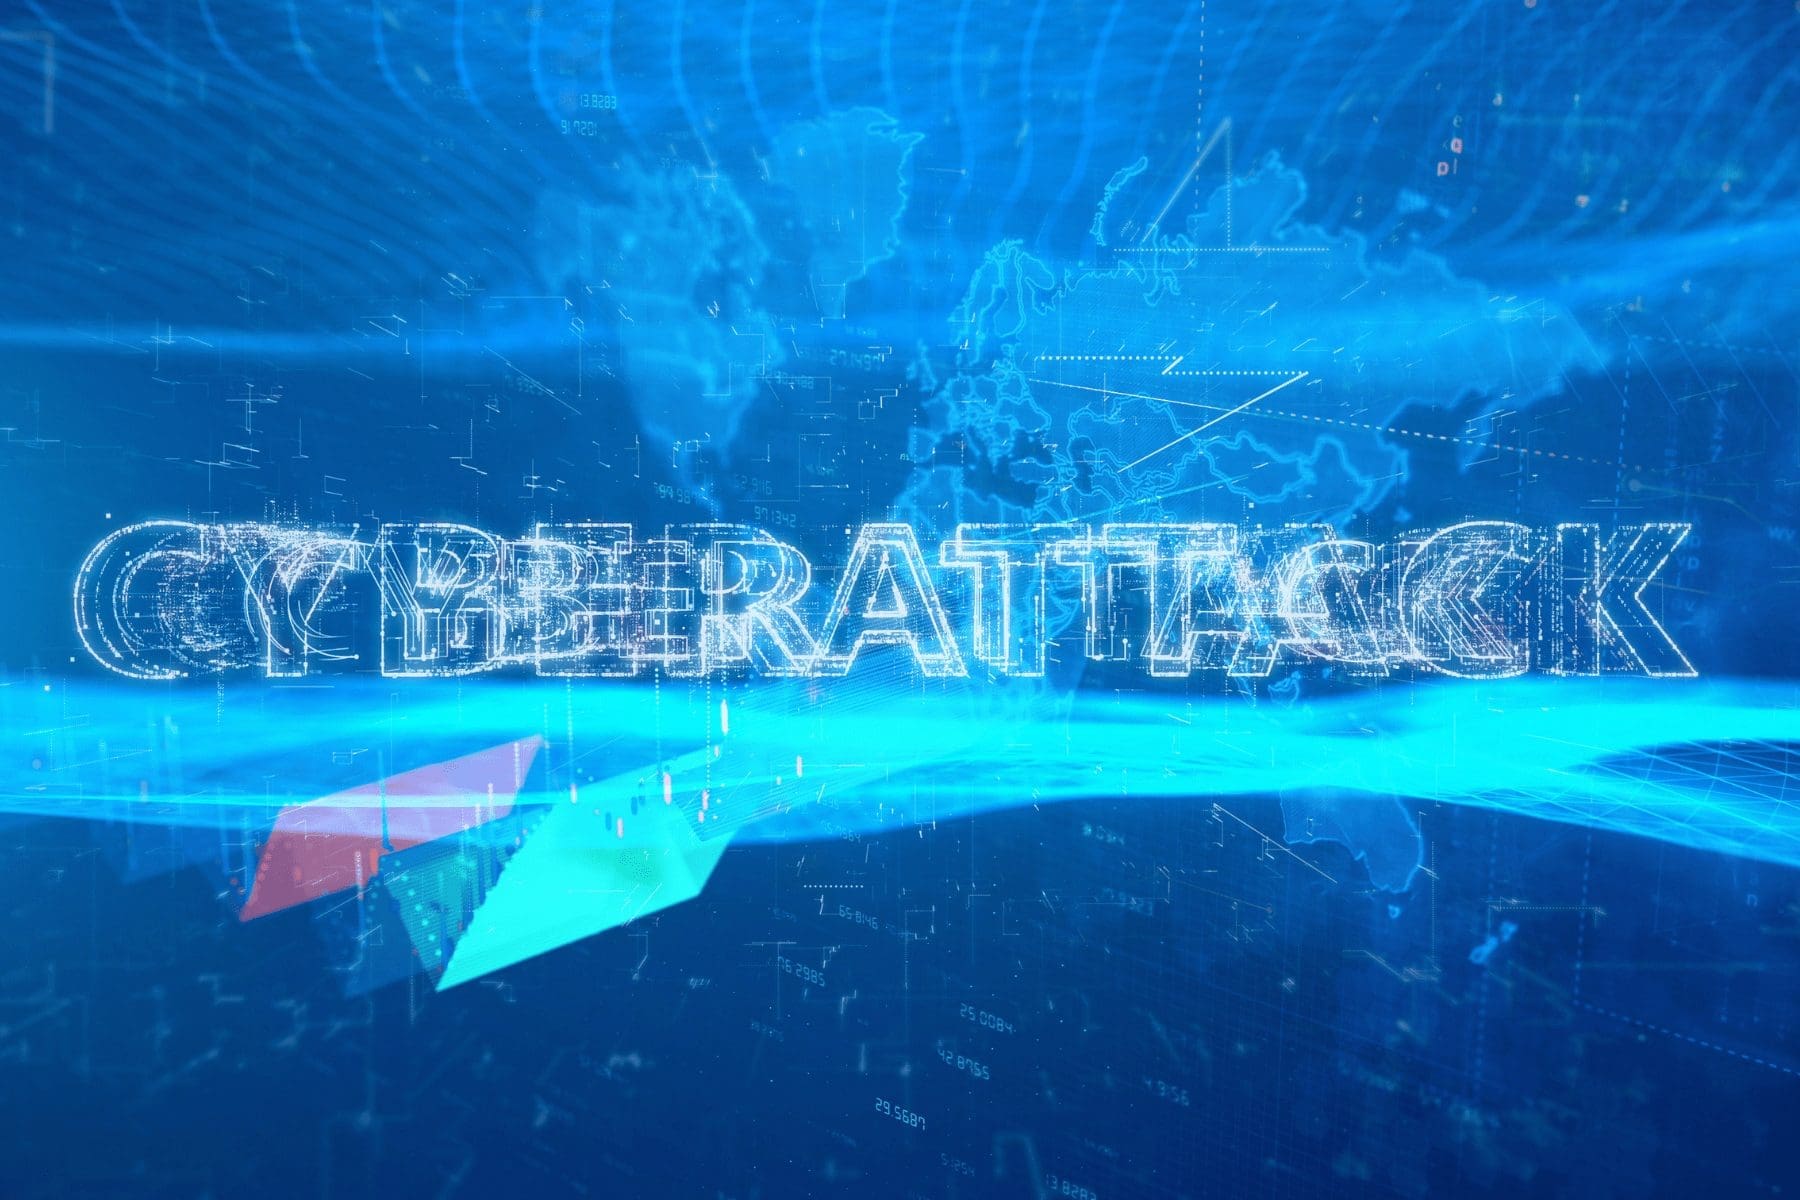 nation-state cyberattack logo